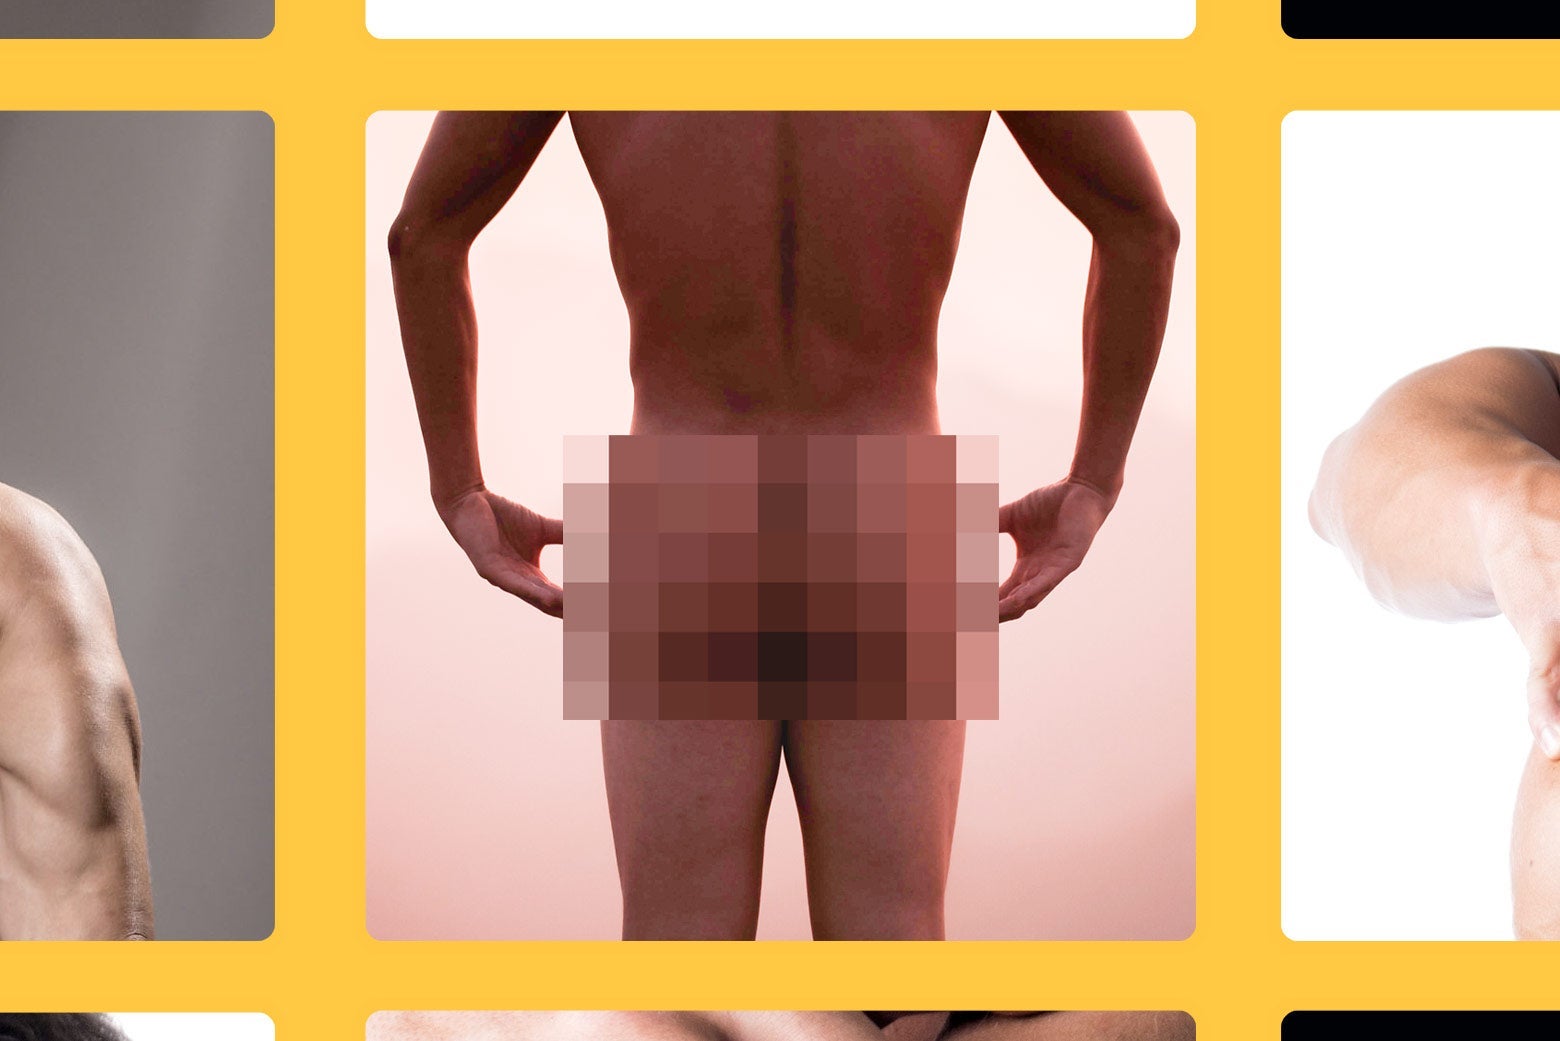 Grindr Whats behind the new rule thats surprising users? image